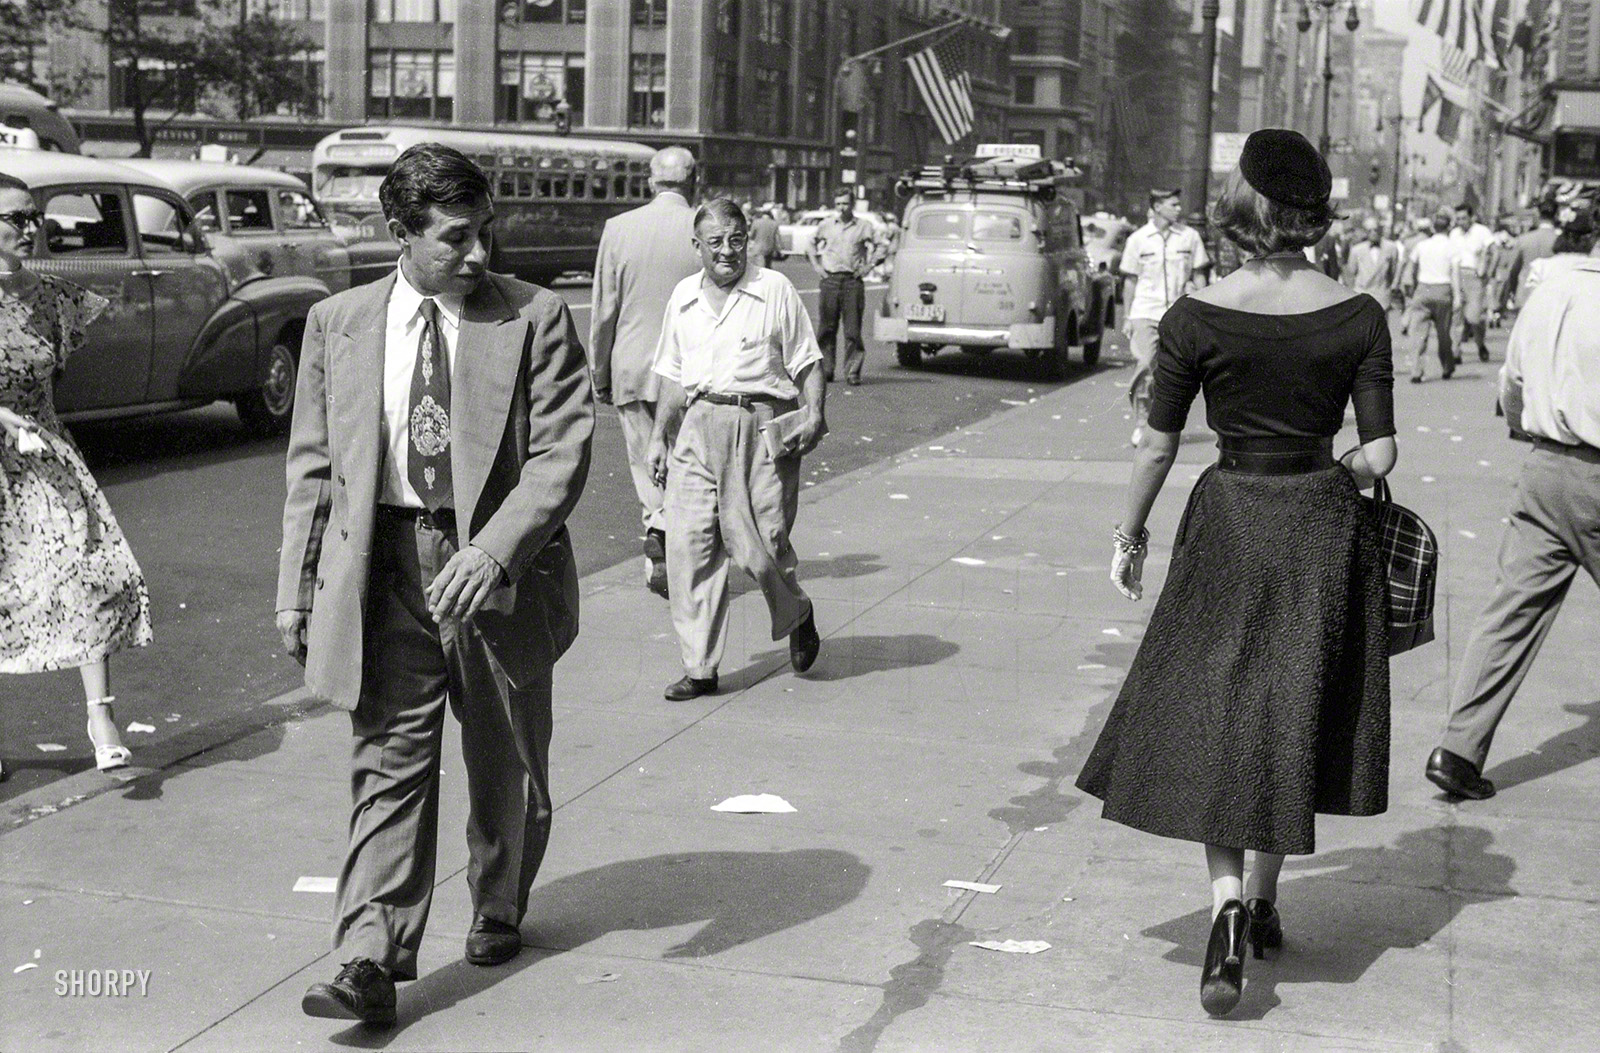 New York, September 1952. "People looking at fashion model Doris Erwin as she walks down Fifth Avenue." From photos by Ralph Ginzburg for the Look magazine assignment "A Young Man's Fancy -- Model on the Street." View full size.